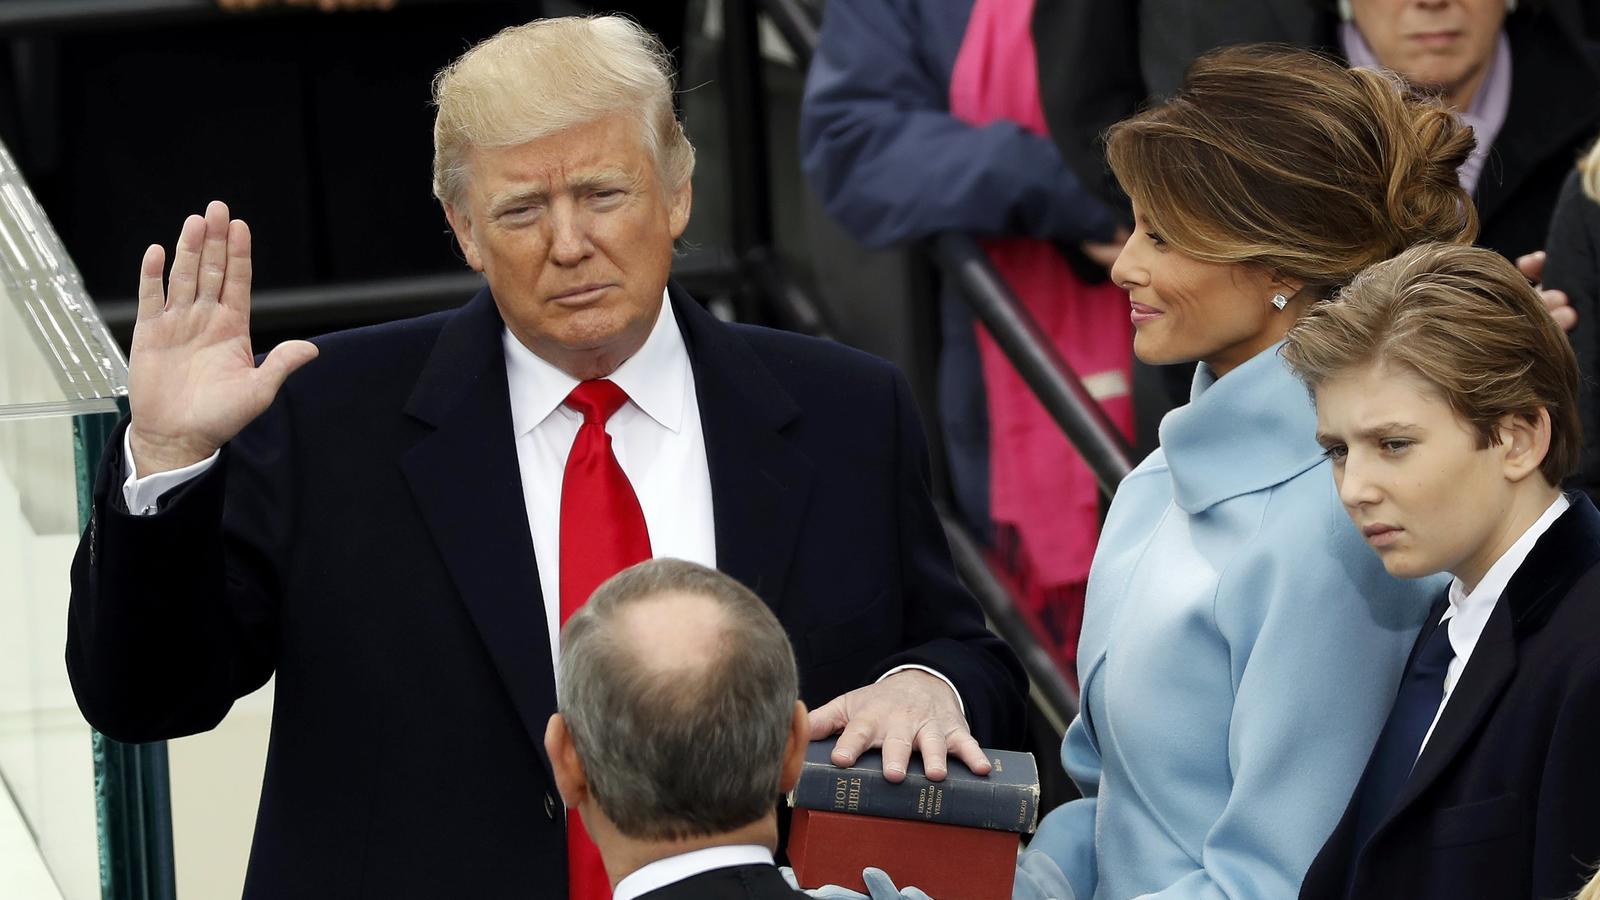 US President Donald Trump takes the oath of office with his wife Melania and son Barron at his side, during his inauguration at the U.S. Capitol in Washington, U.S., January 20, 2017. REUTERS/Kevin Lamarque